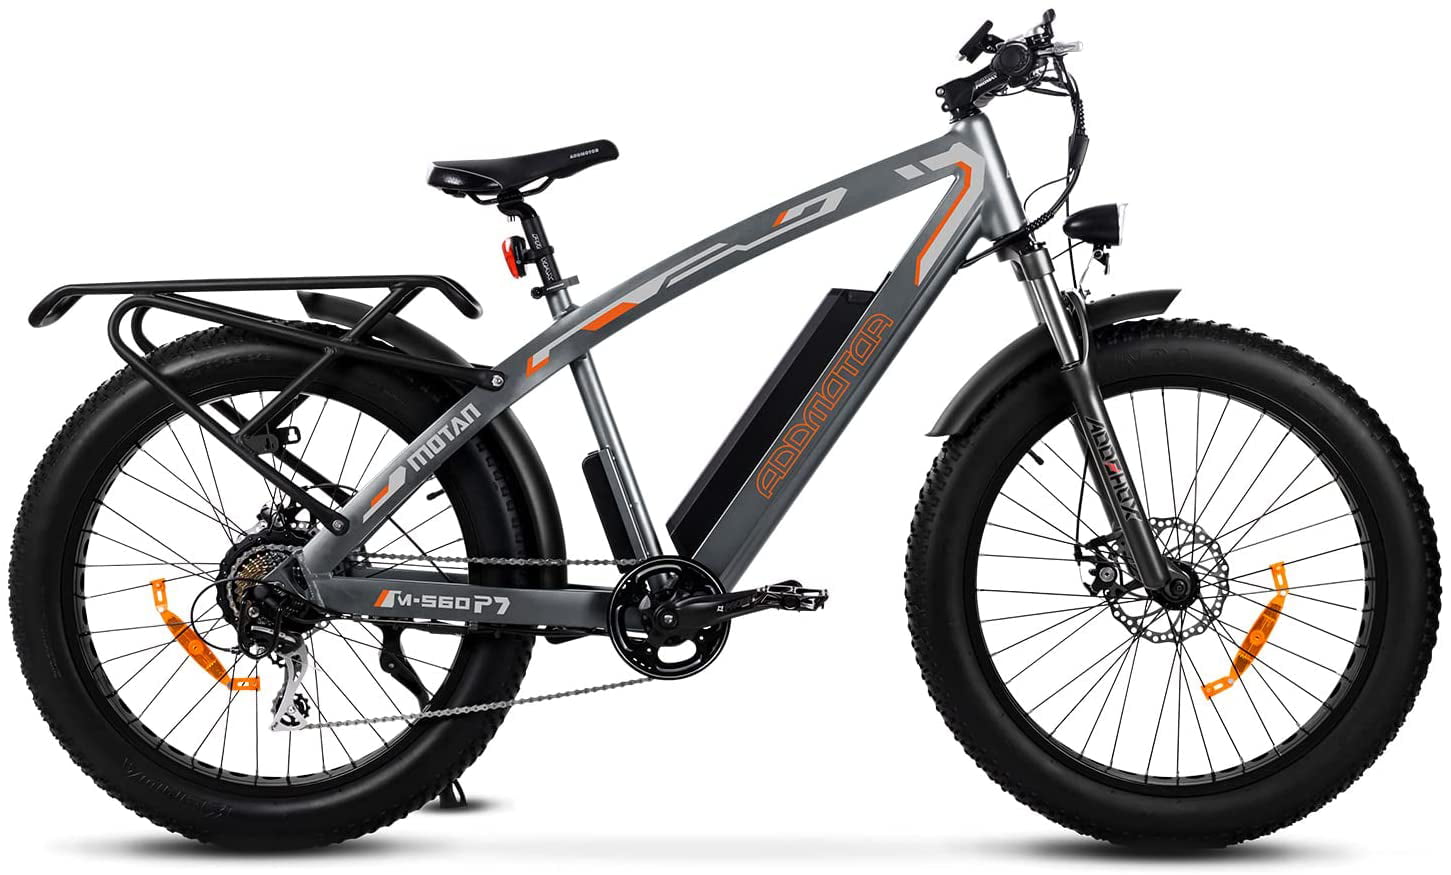 VTSP Mountain Bike Electric Bike Cruiser Bicycle 21 Speeds 1000W 48V 17AH,Upgraded XF660 e-Bike for Adults 4.0 x 26 Inch Fat Tire Mechanical Brake Brushless Shimano Pedal Assist LCD Display